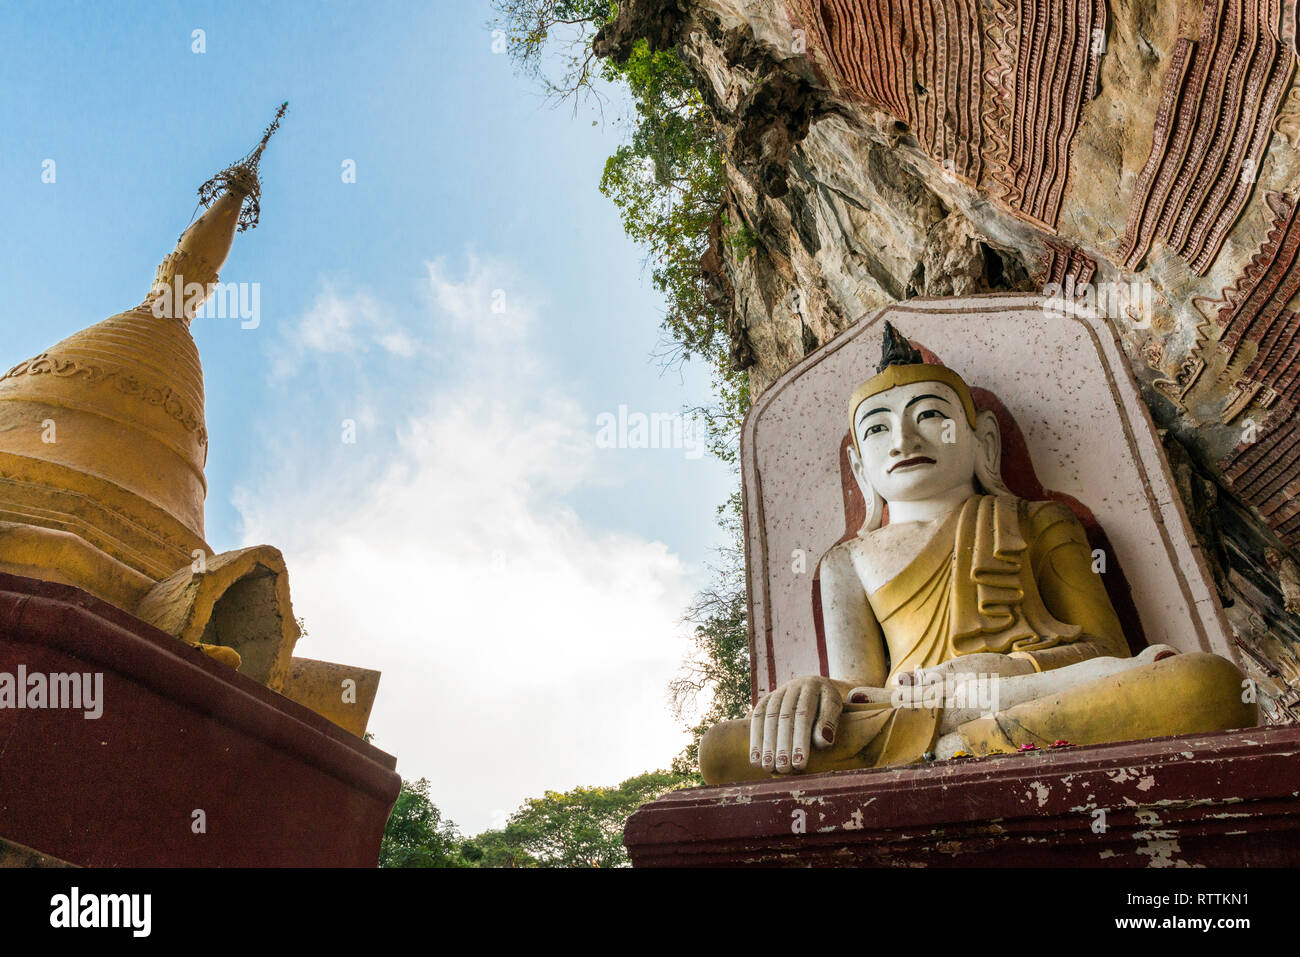 HPA-AN, MYANMAR - 19 NOVEMBER, 2018: Wide angle picture of golden pagoda and huge Buddha statue at Kaw Goon Cave in Hpa-An, Myanmar Stock Photo